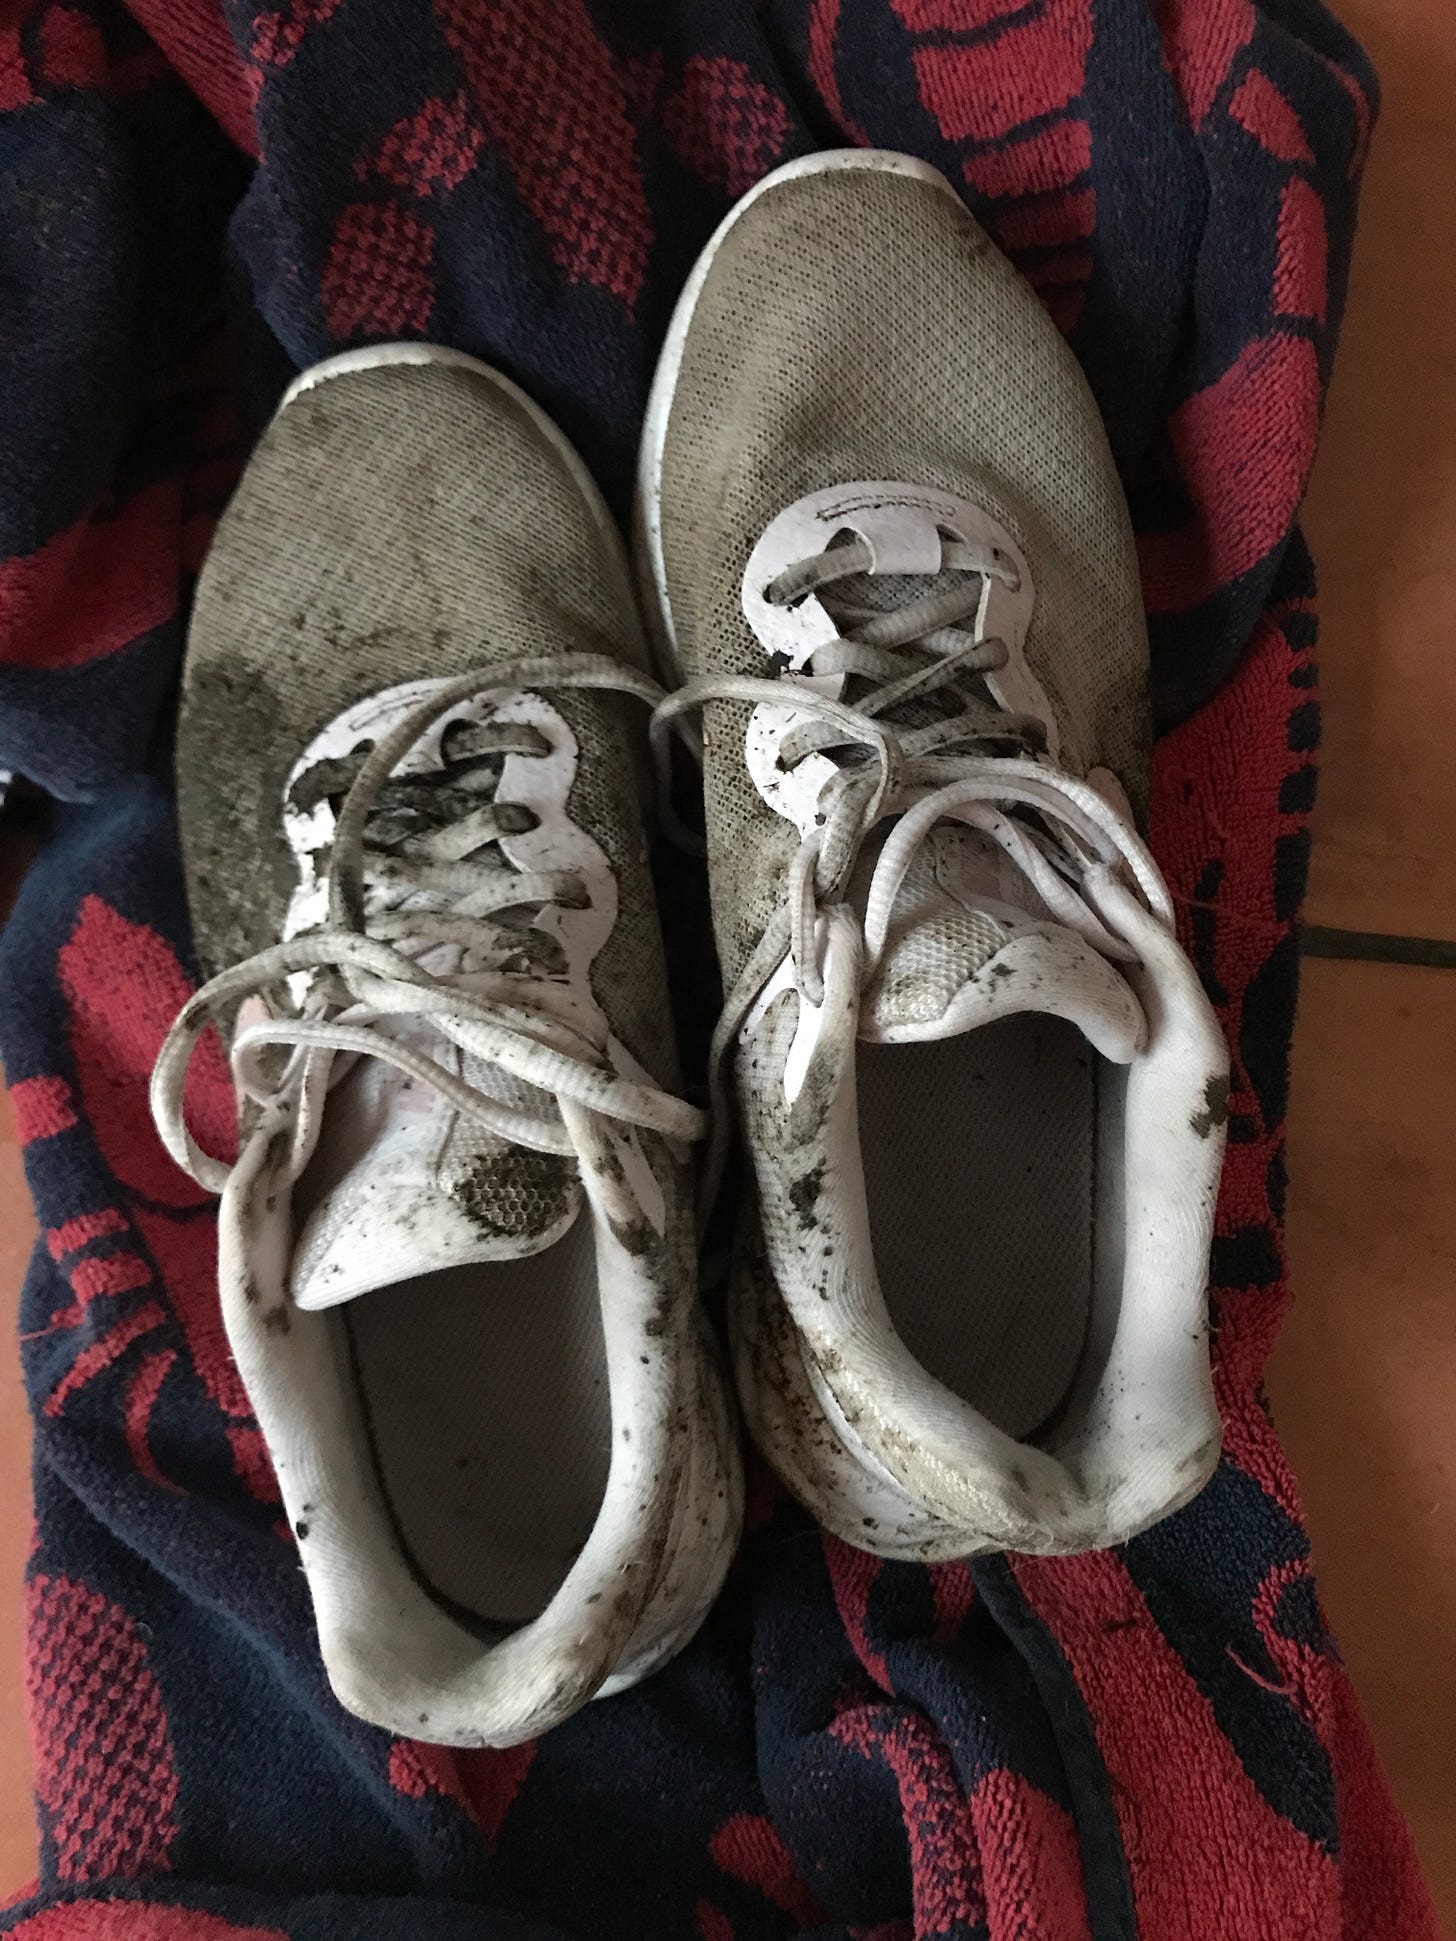 Muddy running shoes on a towel